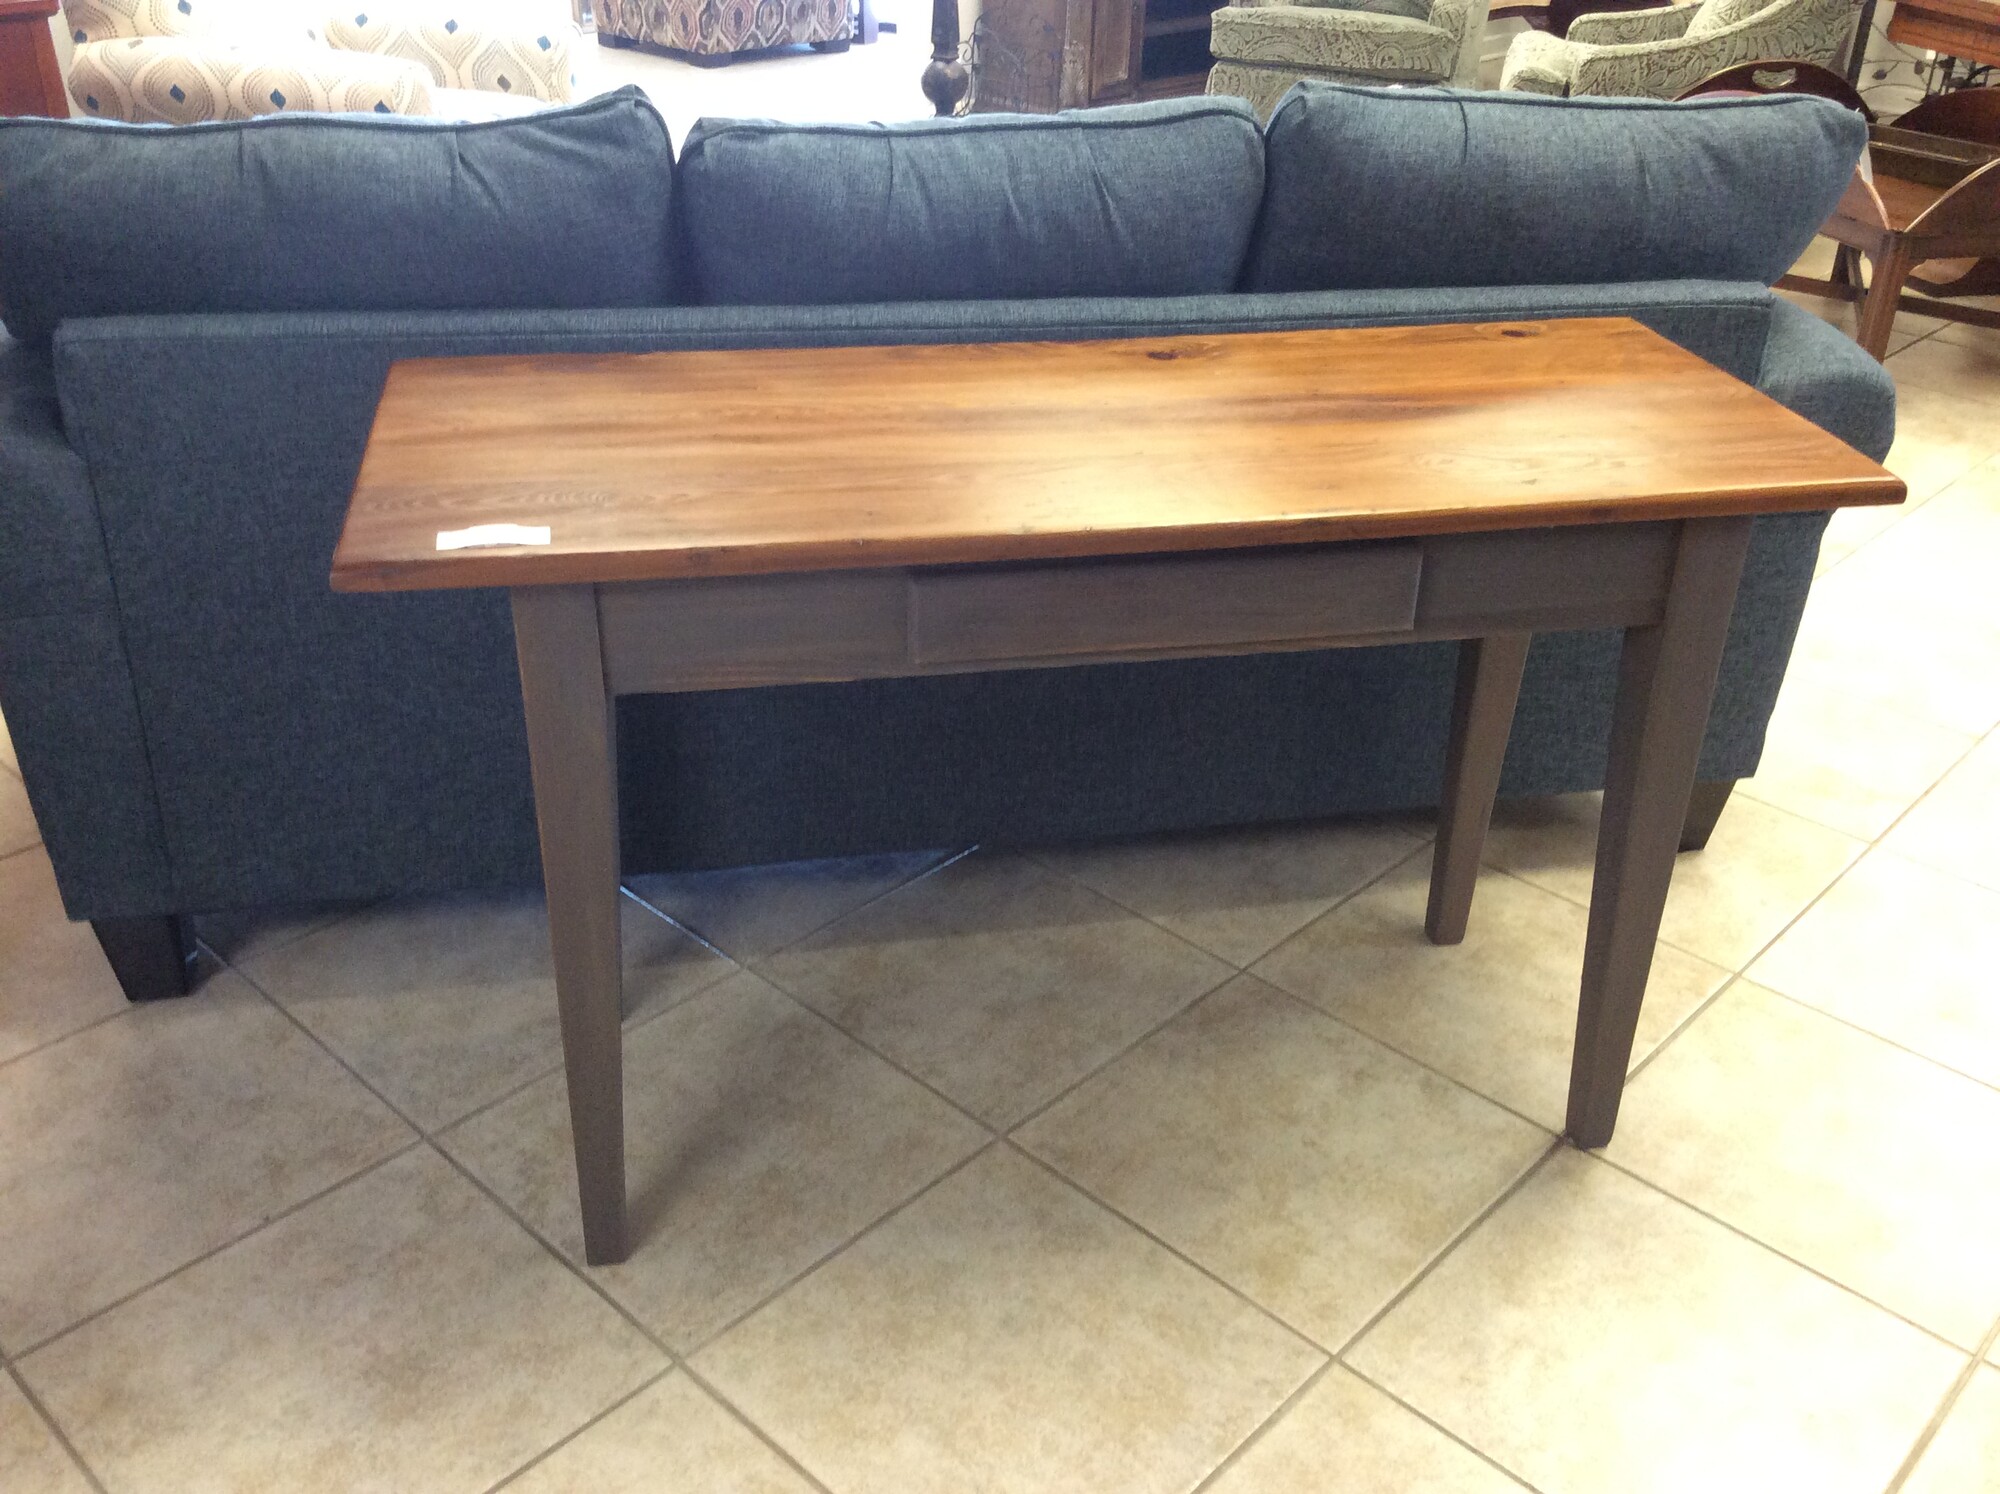 This is a beautiful, hand made, Cypress Desk with 1 drawer.